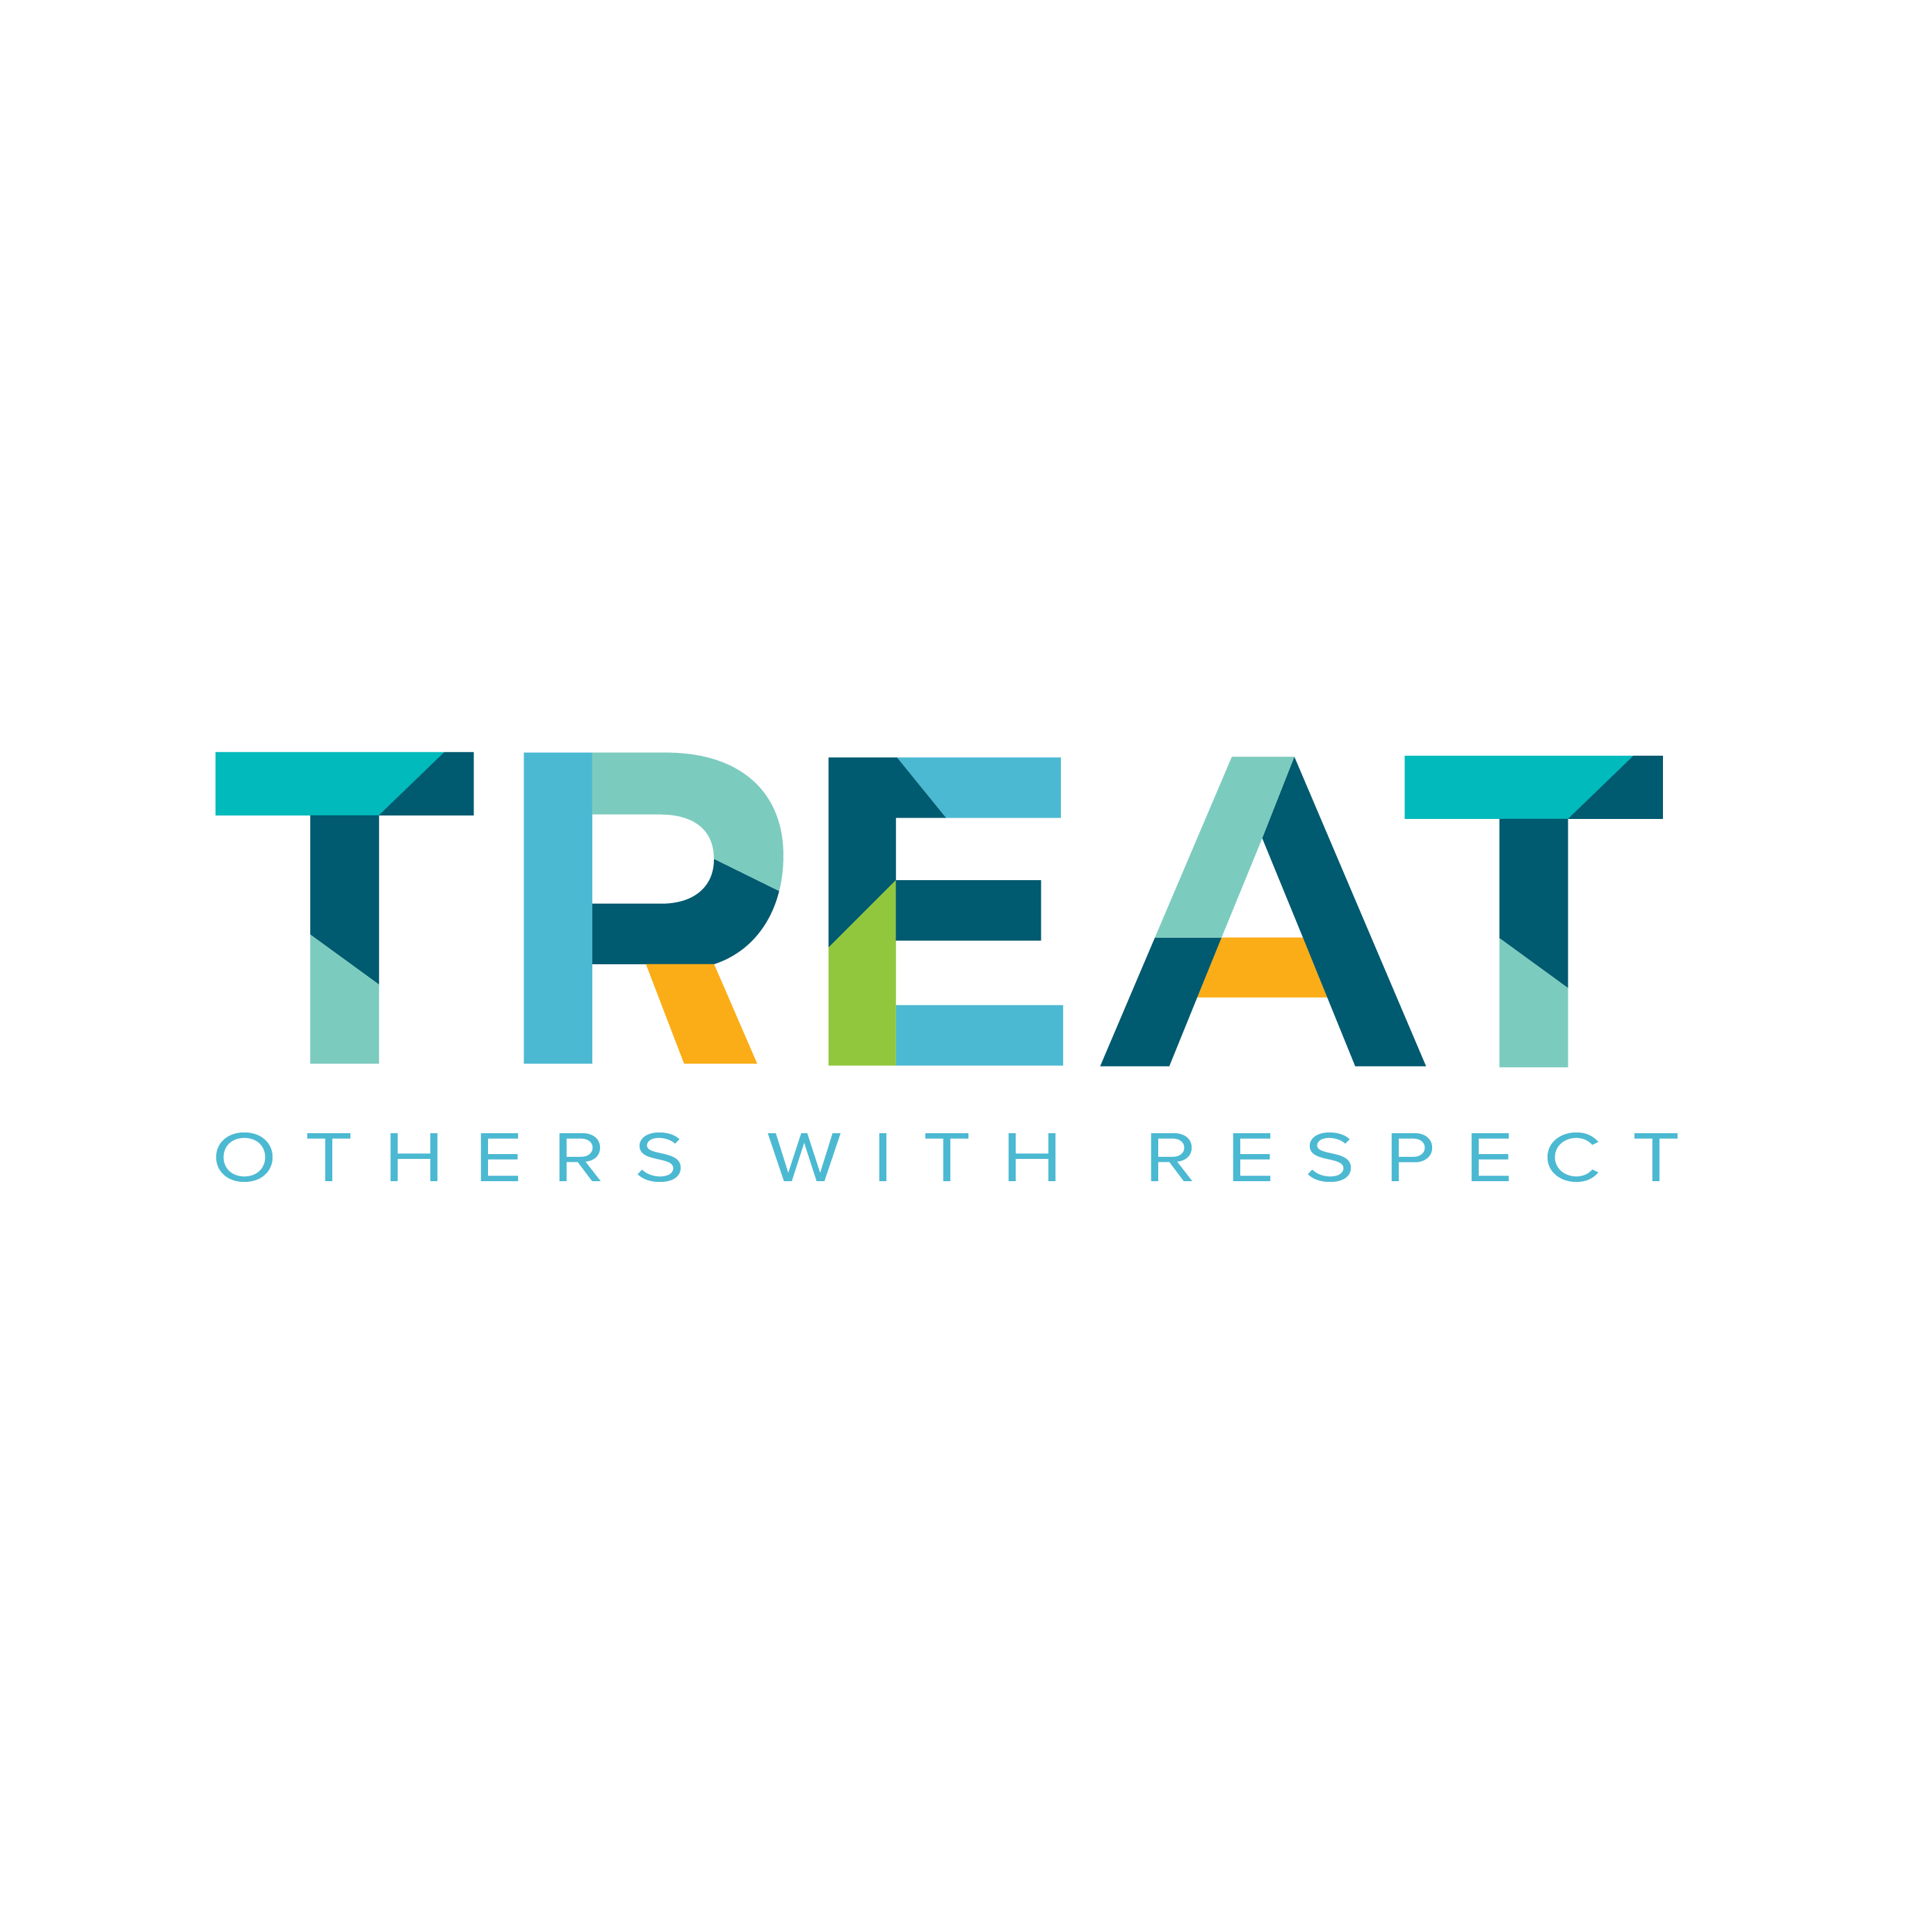 Treat others with respect